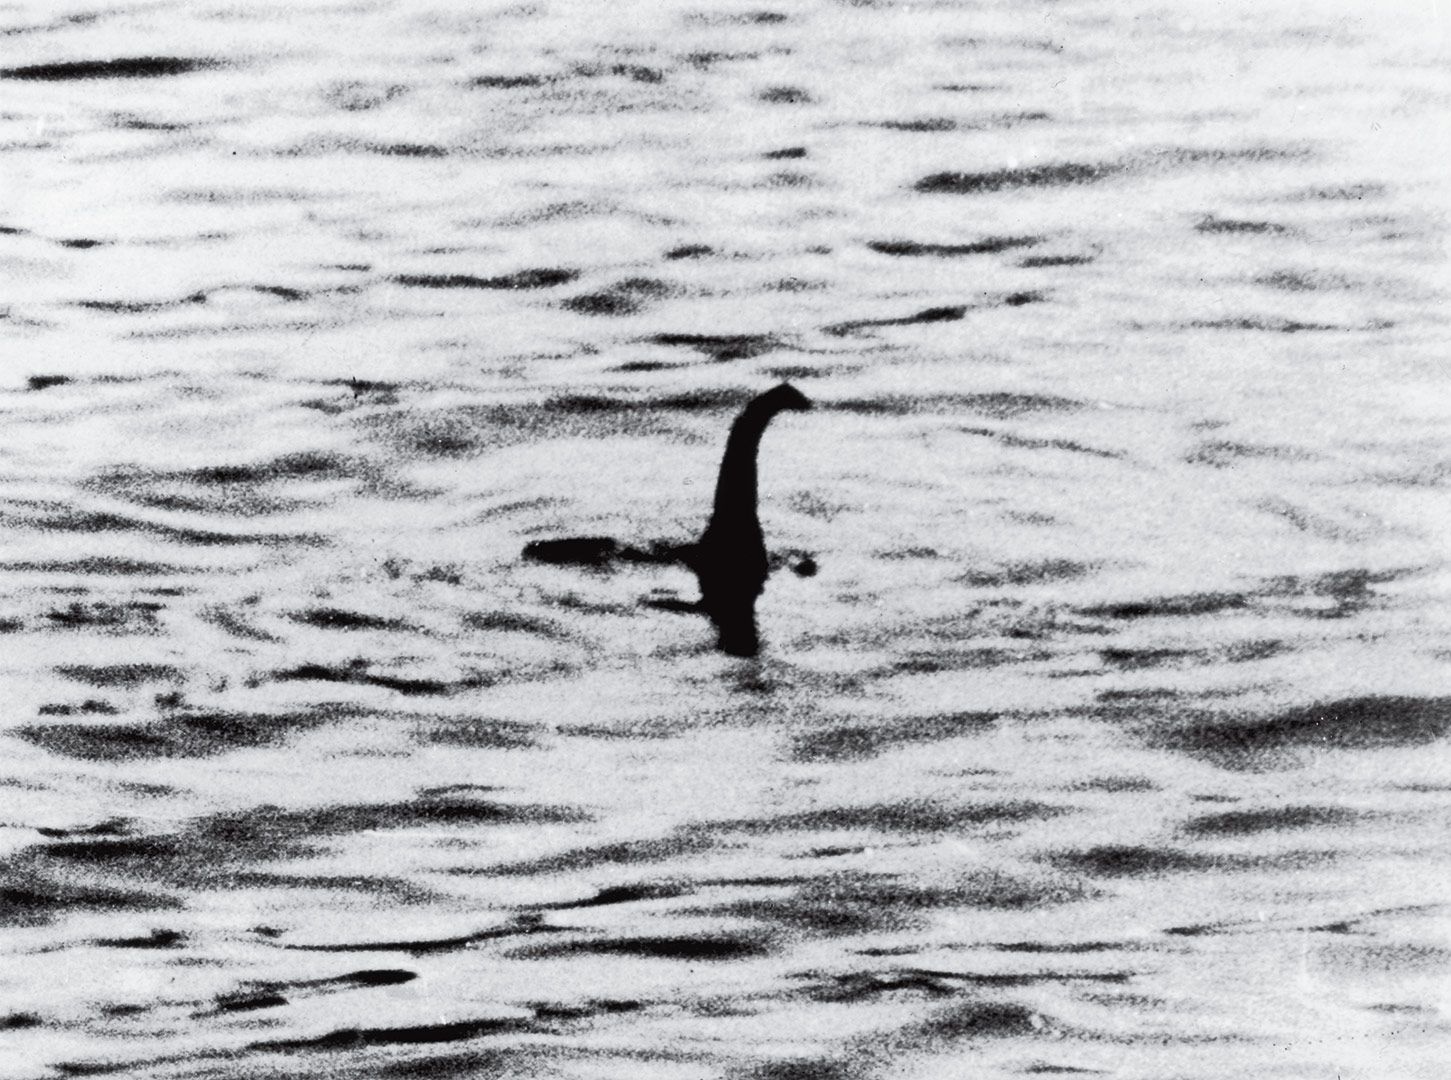 The Loch Ness Monster Photographs. The Most Influential Image of All Time